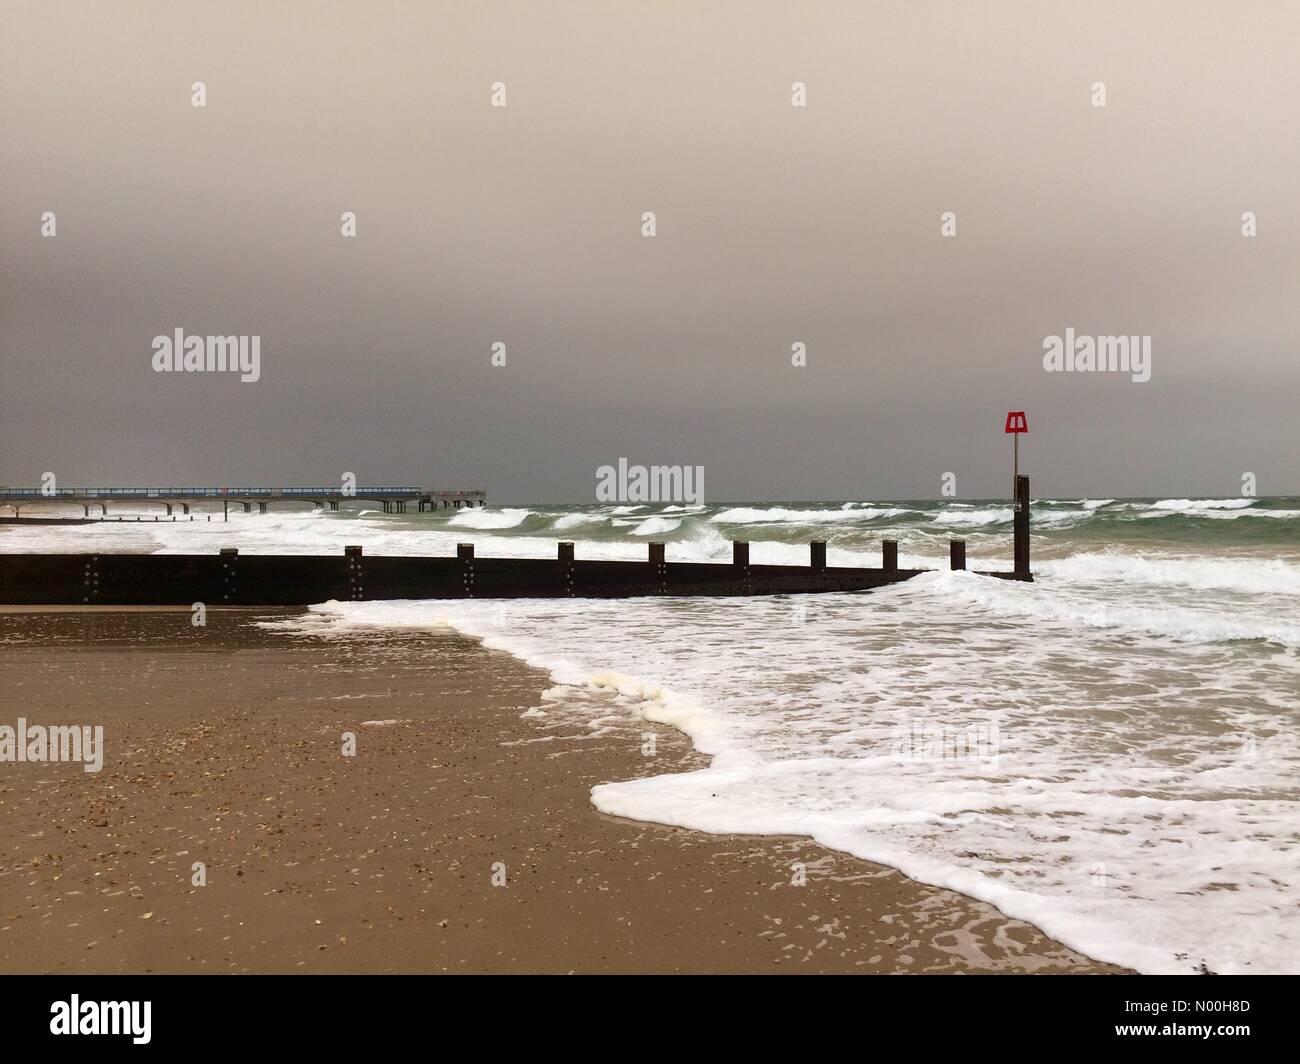 Bournemouth, Dorset, UK. 16th October, 2017. UK Weather: Storm Ophelia winds at Bournemouth Boscombe Beach and pier 16th October 2017 Credit: Paul Biggins/StockimoNews/Alamy Live News Credit: Paul Biggins/StockimoNews/Alamy Live News Stock Photo